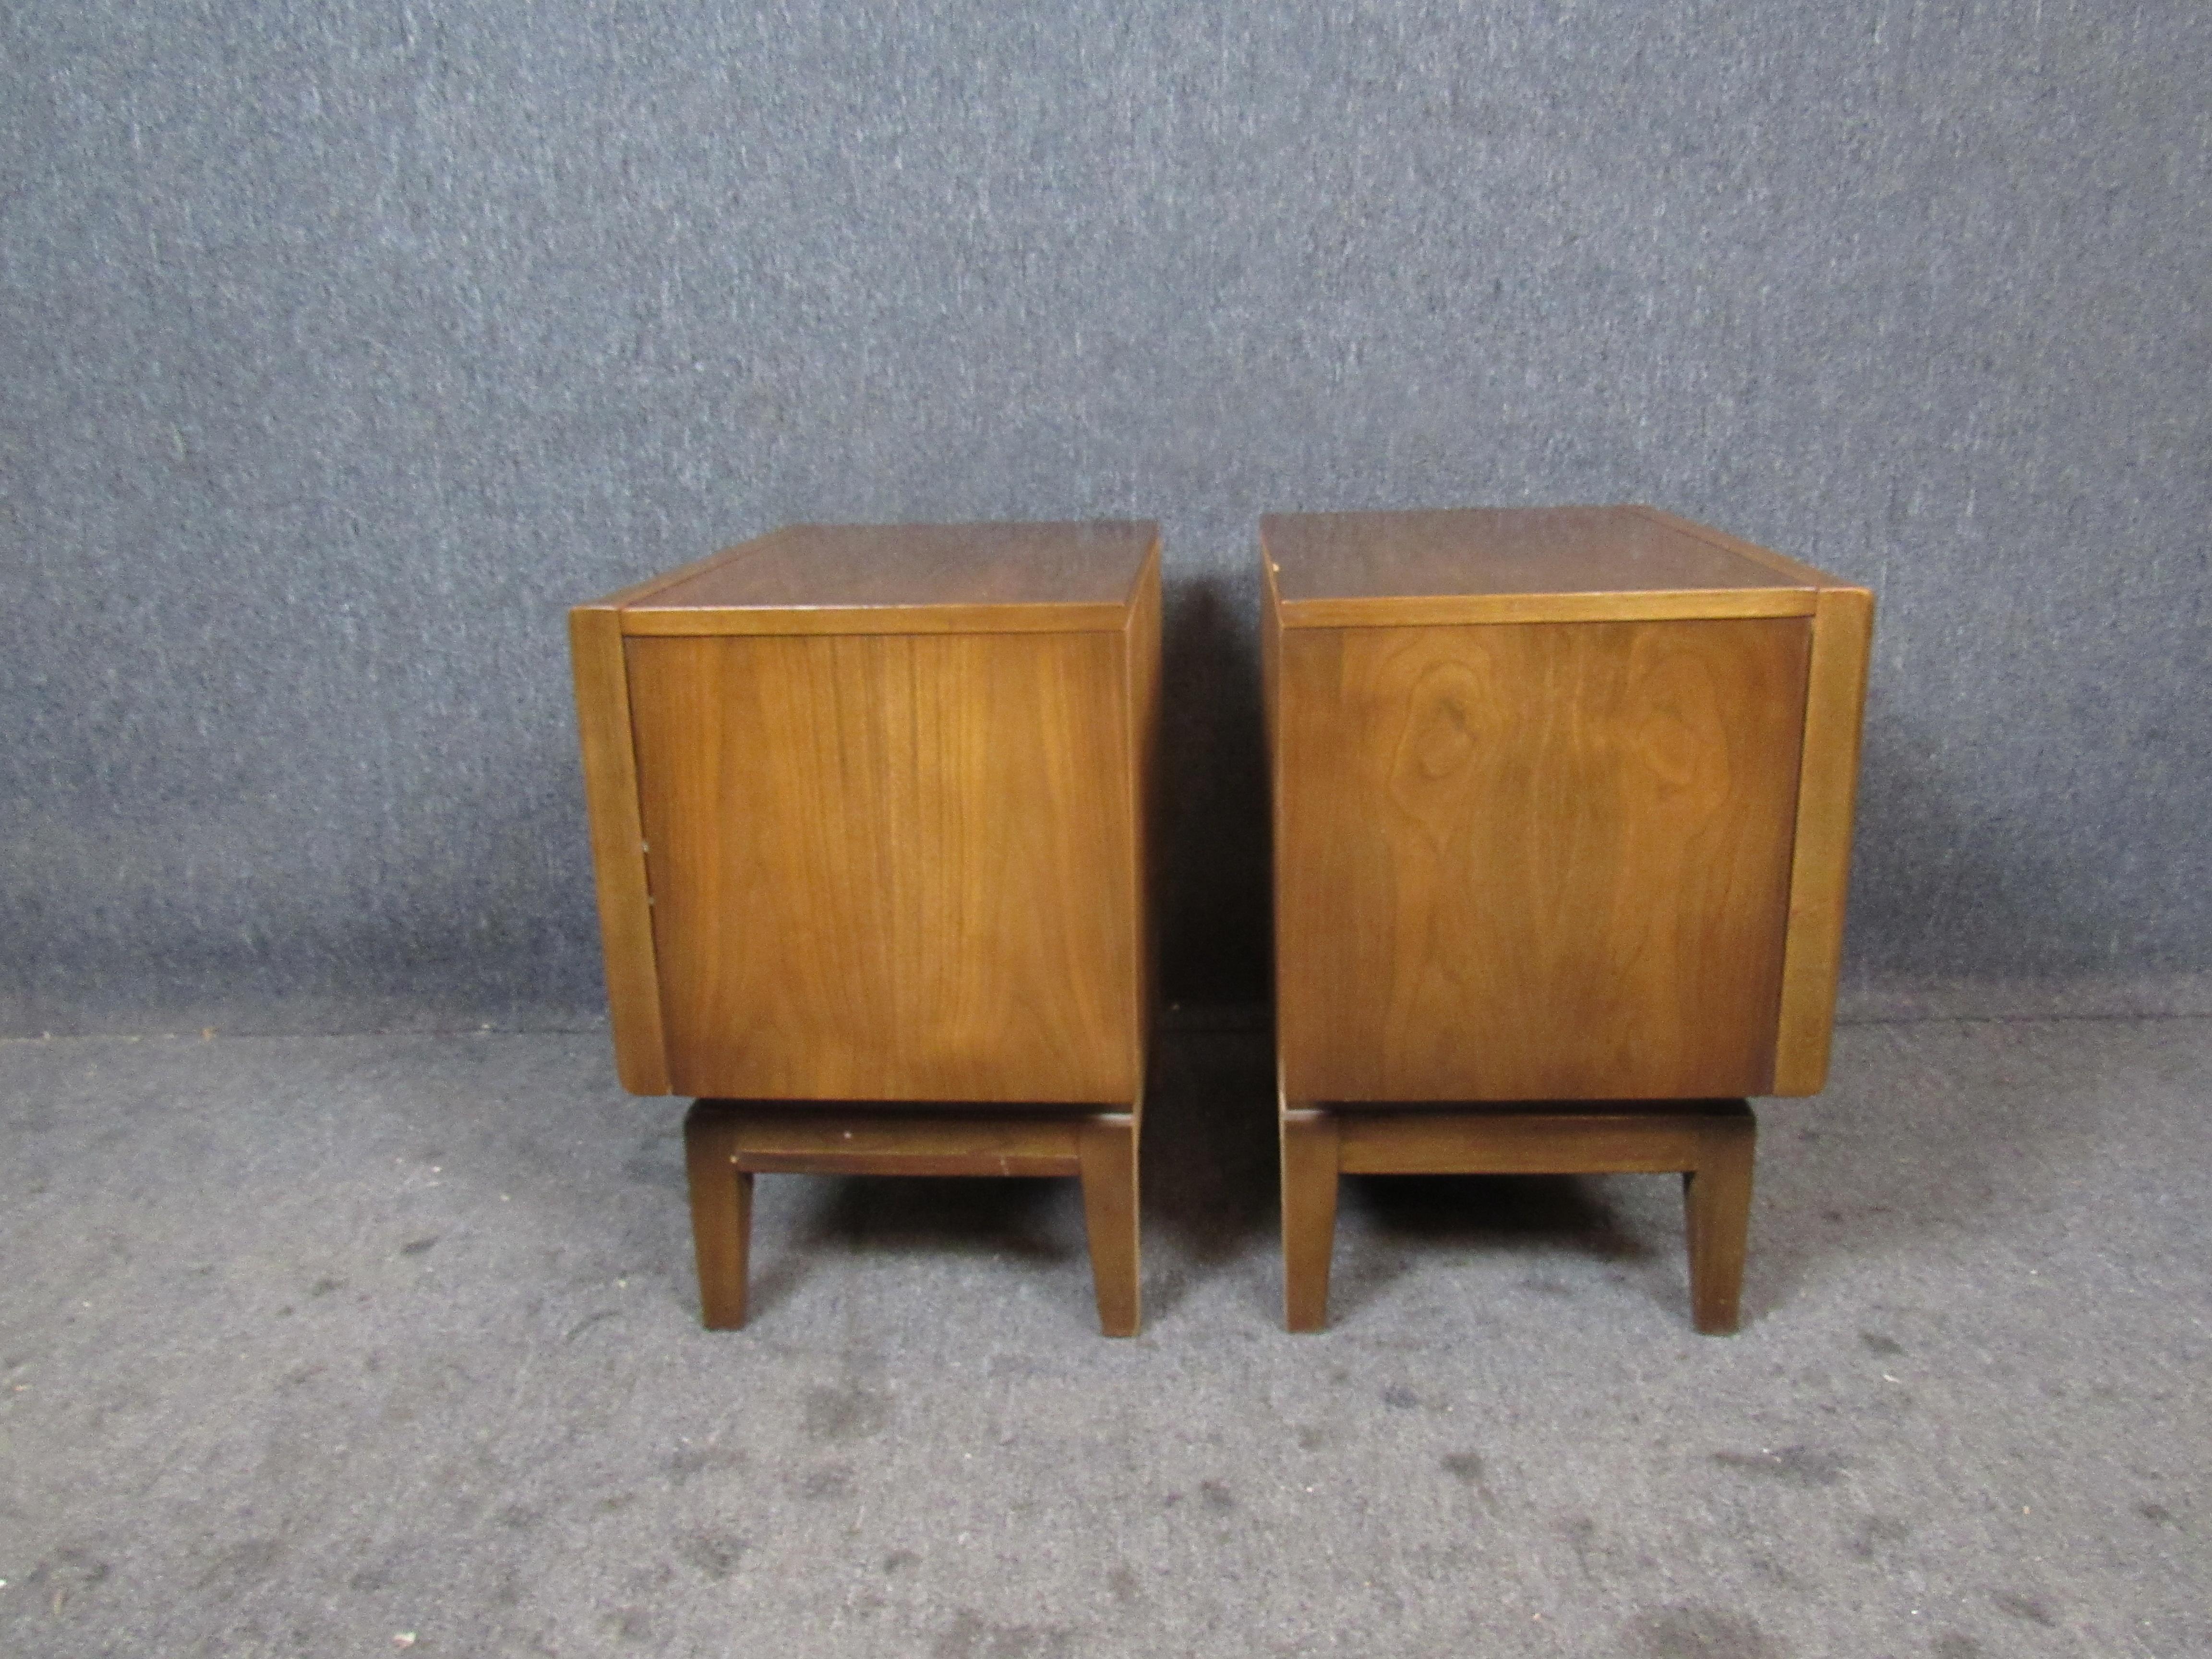 Walnut Midcentury Diamond Tables by United For Sale